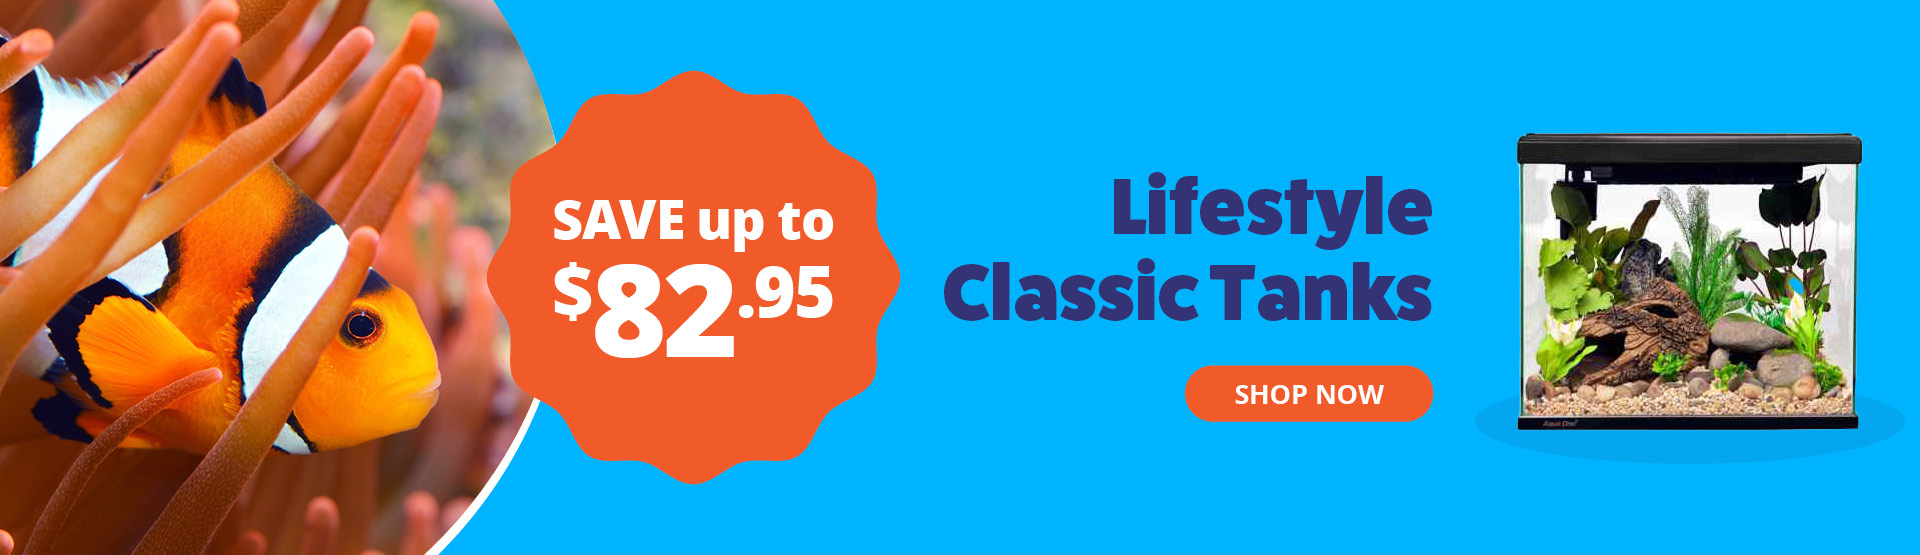 Lifestyle Classic Tanks Up to $82.95 Off